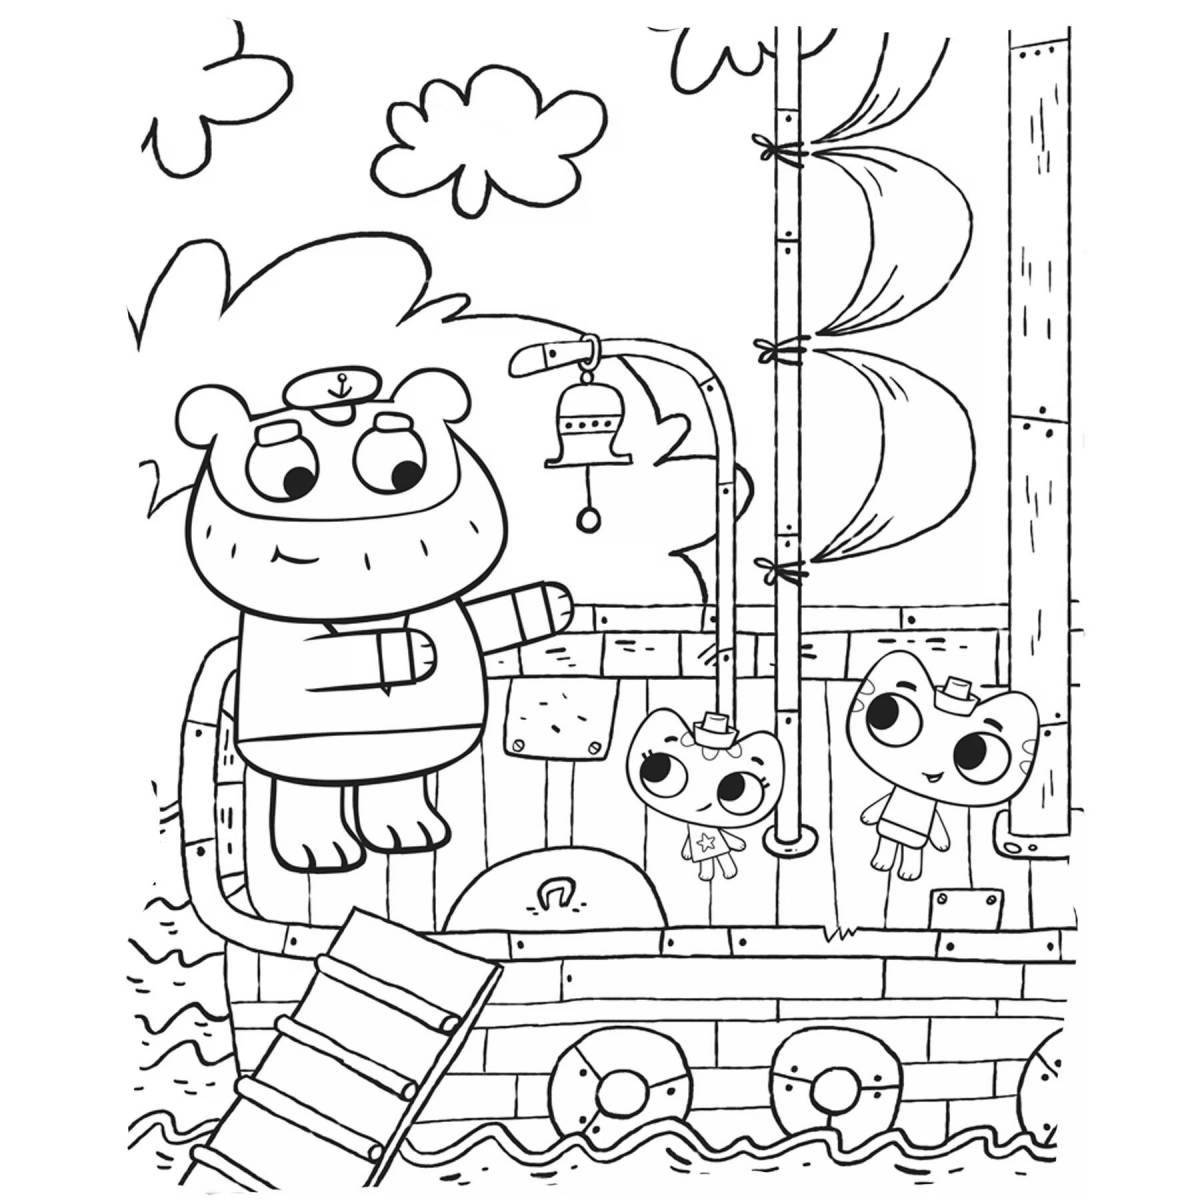 Super meow wonderful coloring book for kids